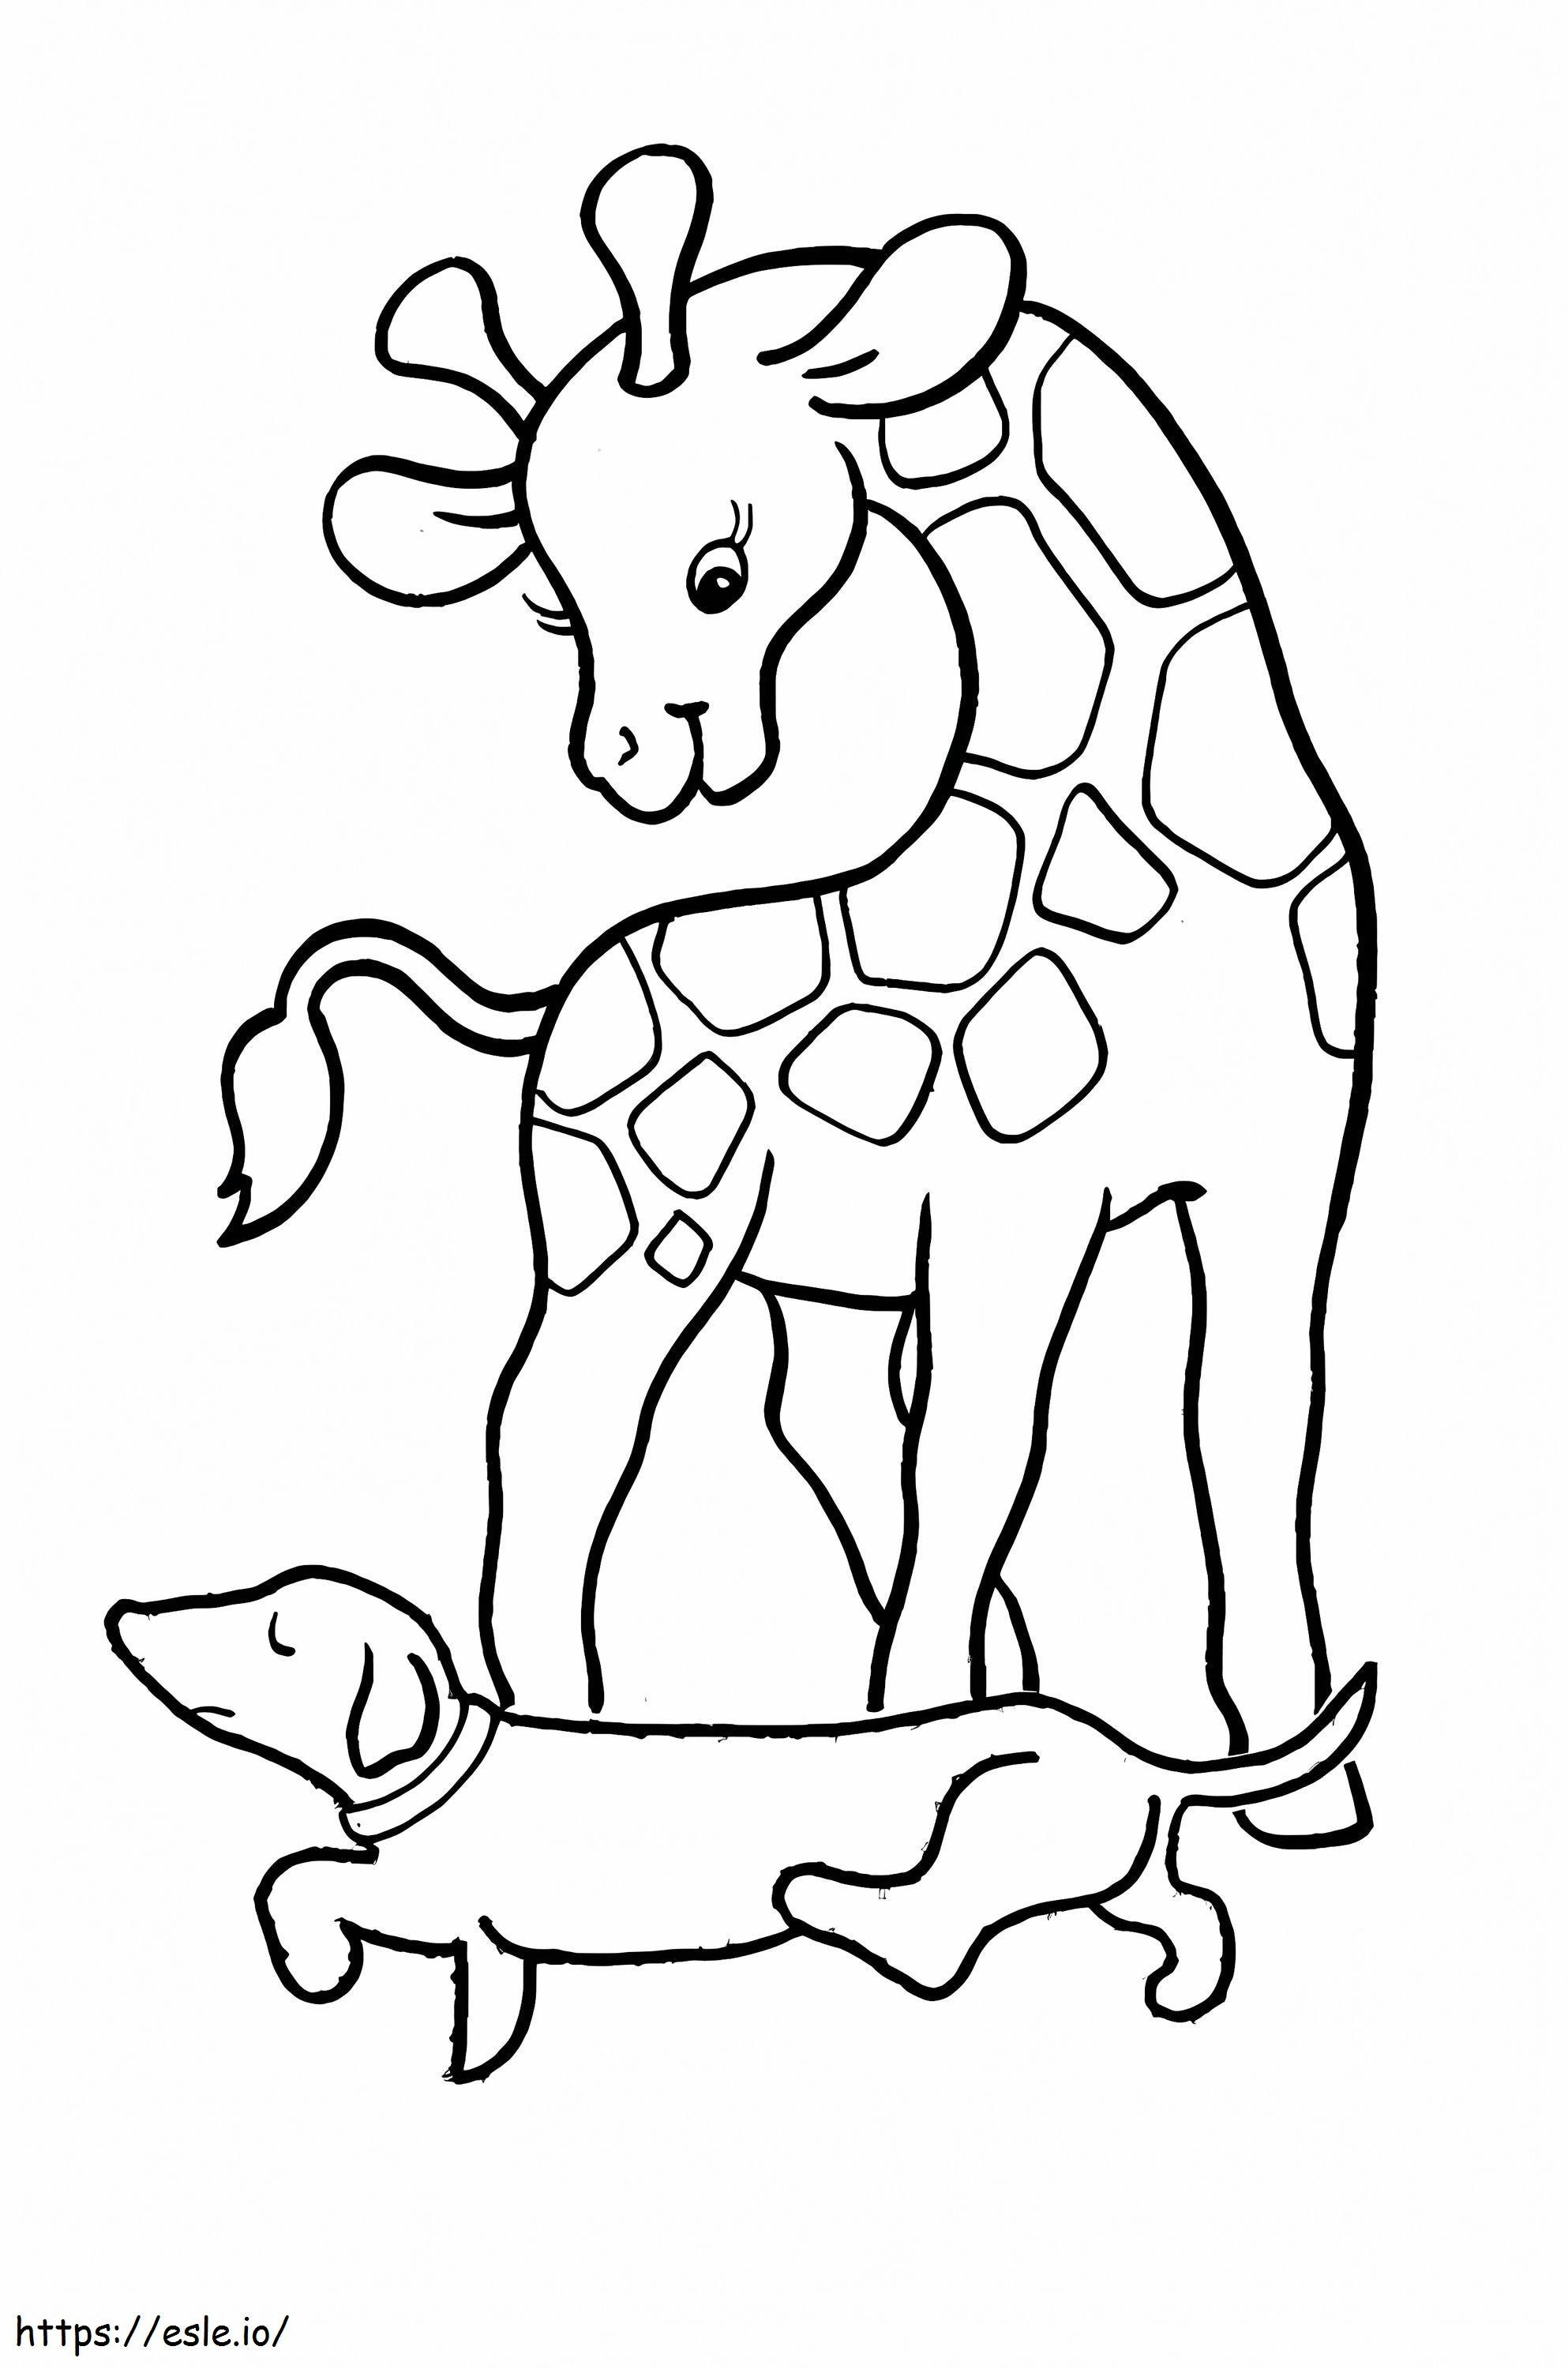 Dog And Giraffe coloring page